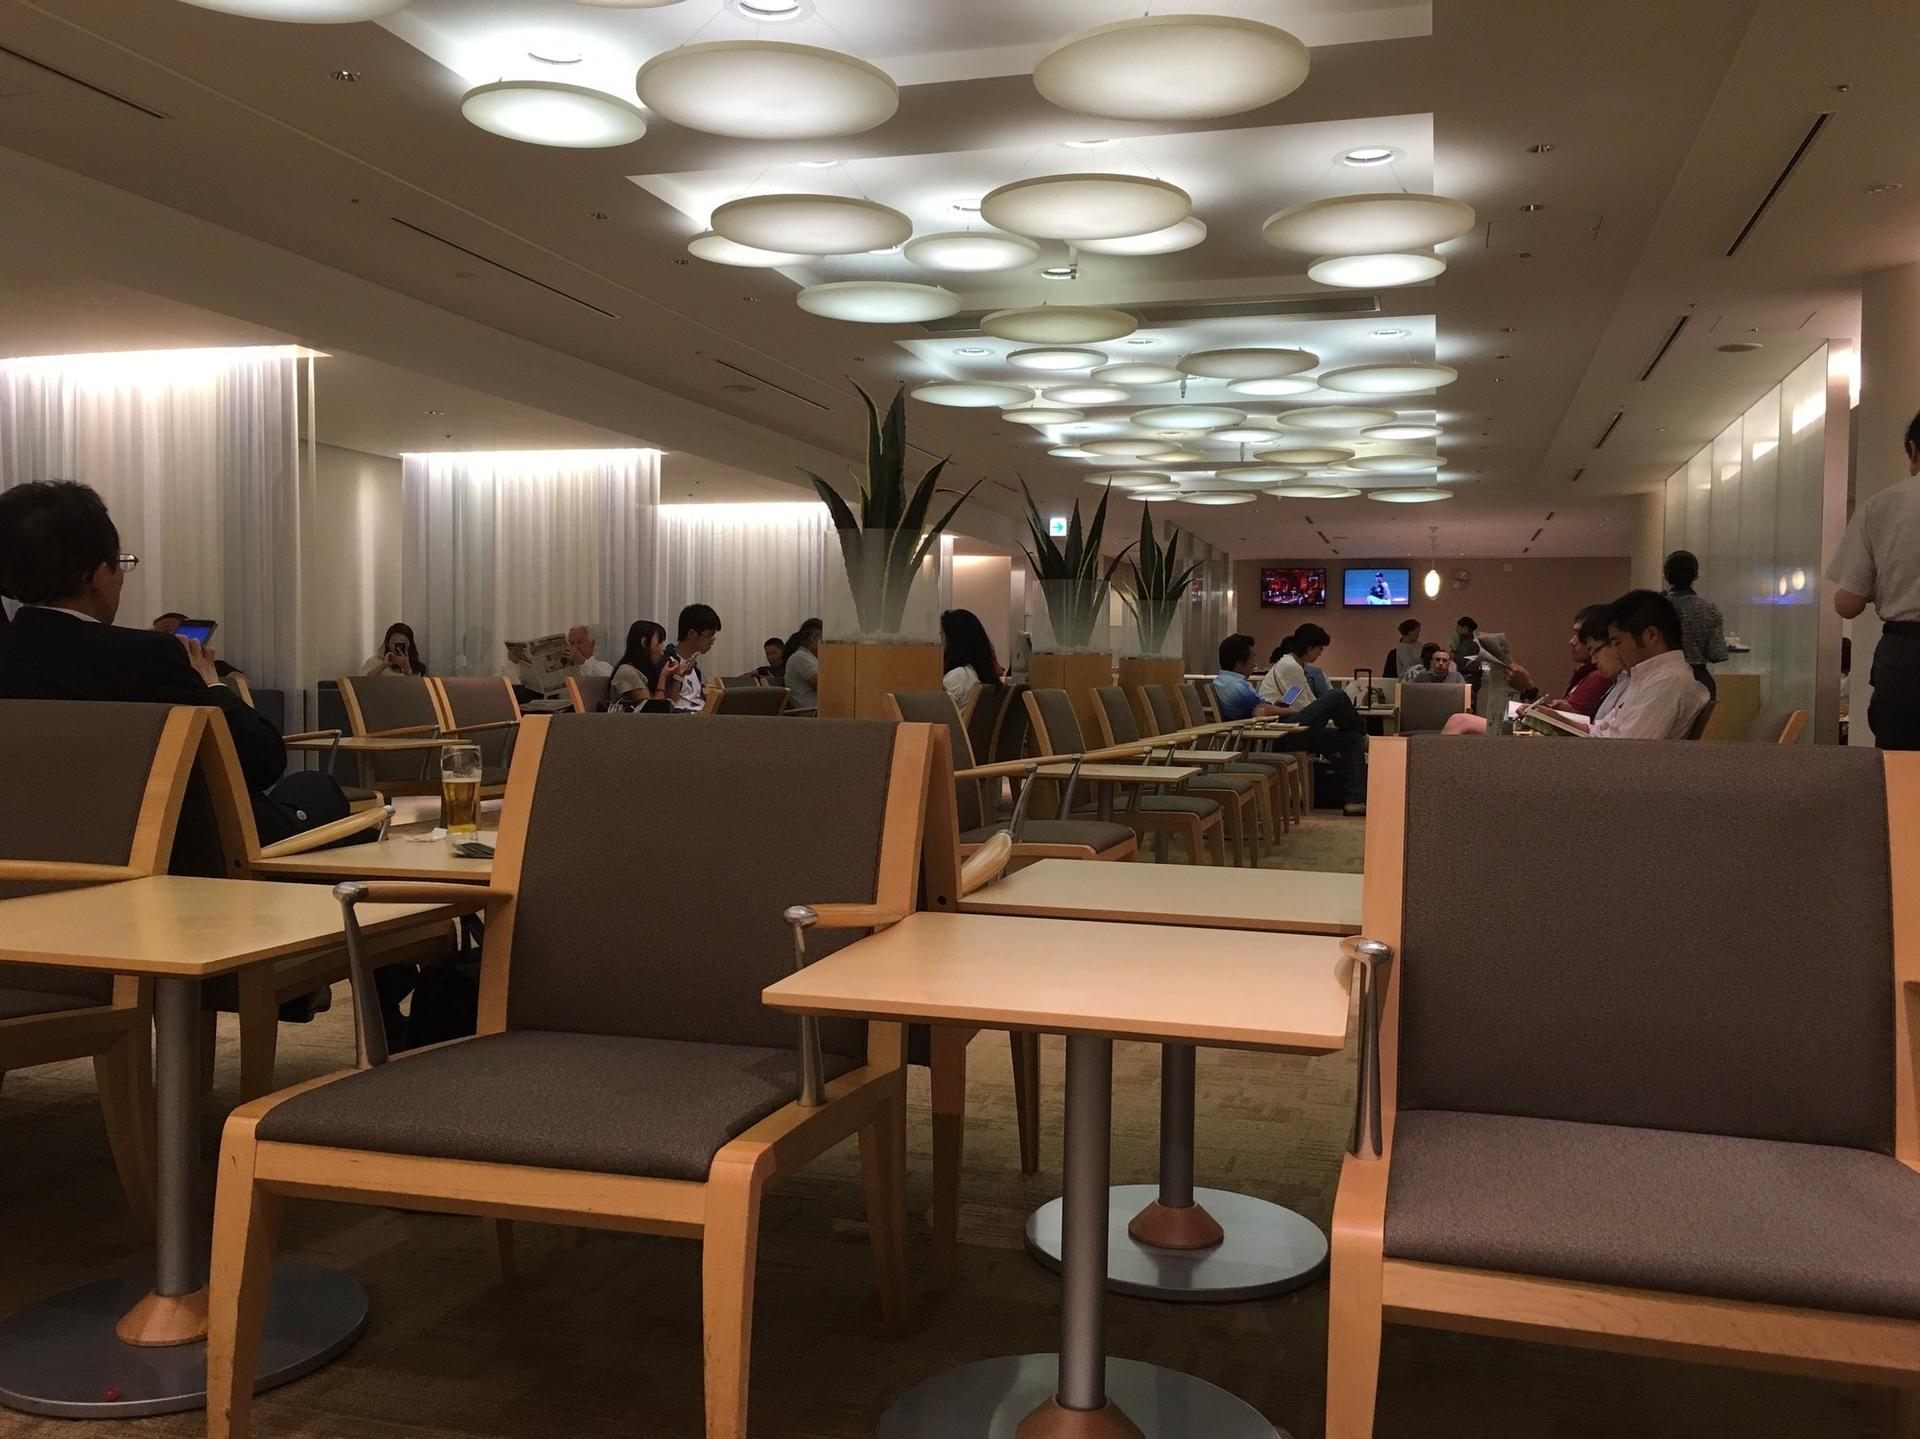 All Nippon Airways ANA Arrival Lounge image 3 of 11